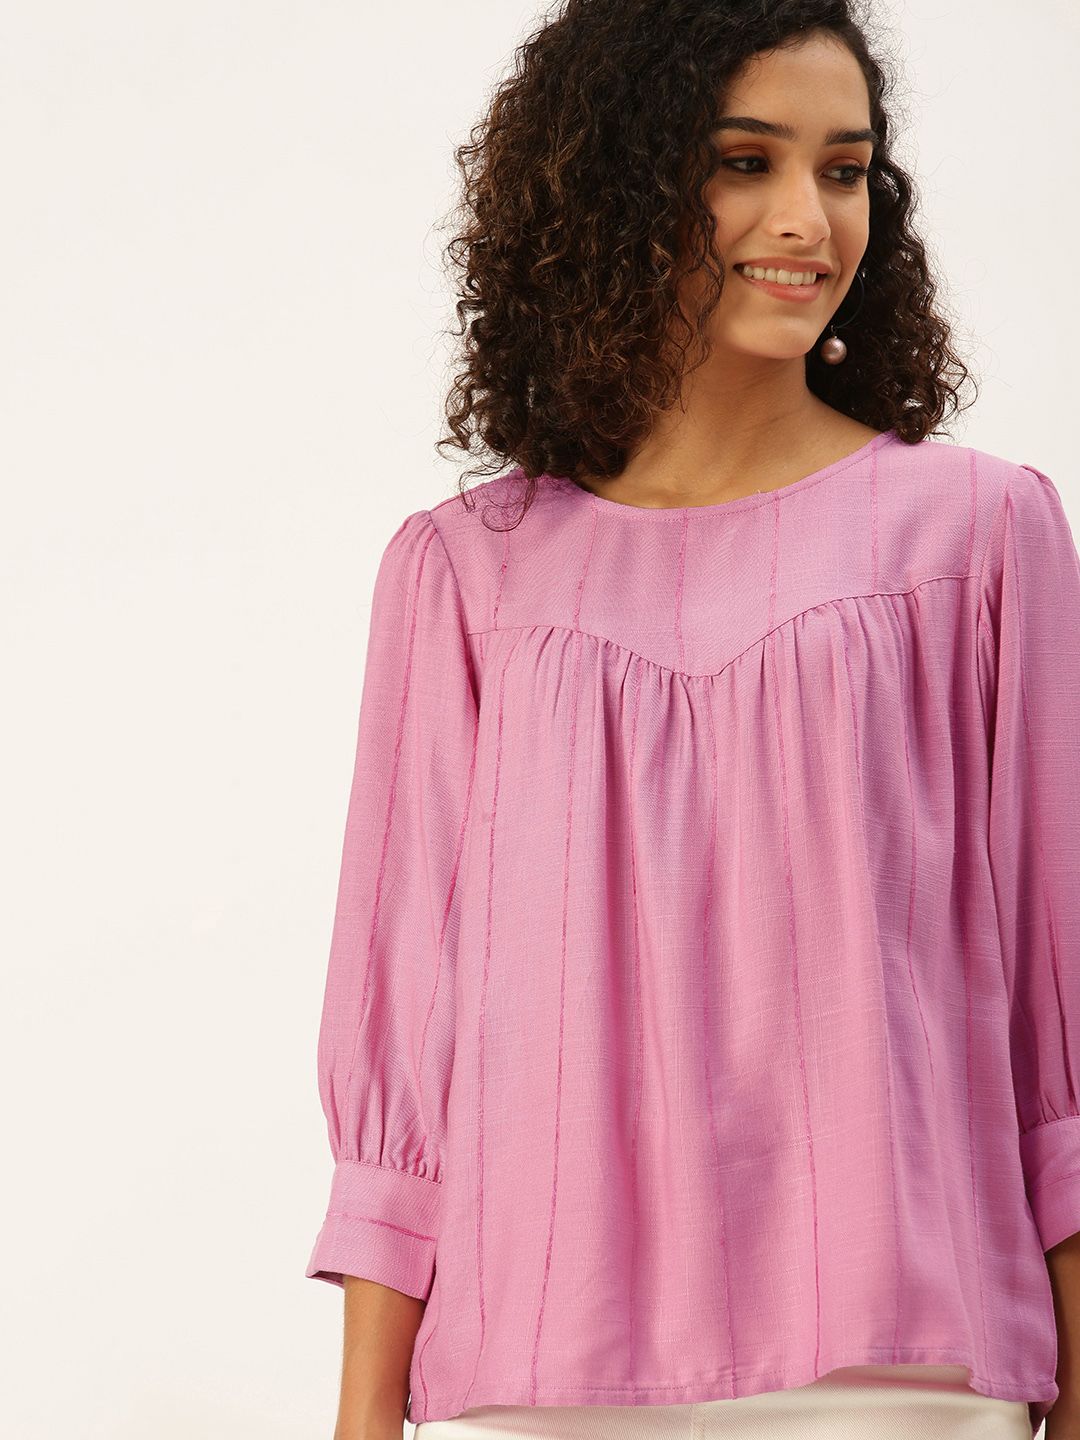 AND Women Lavender Regular Top Price in India